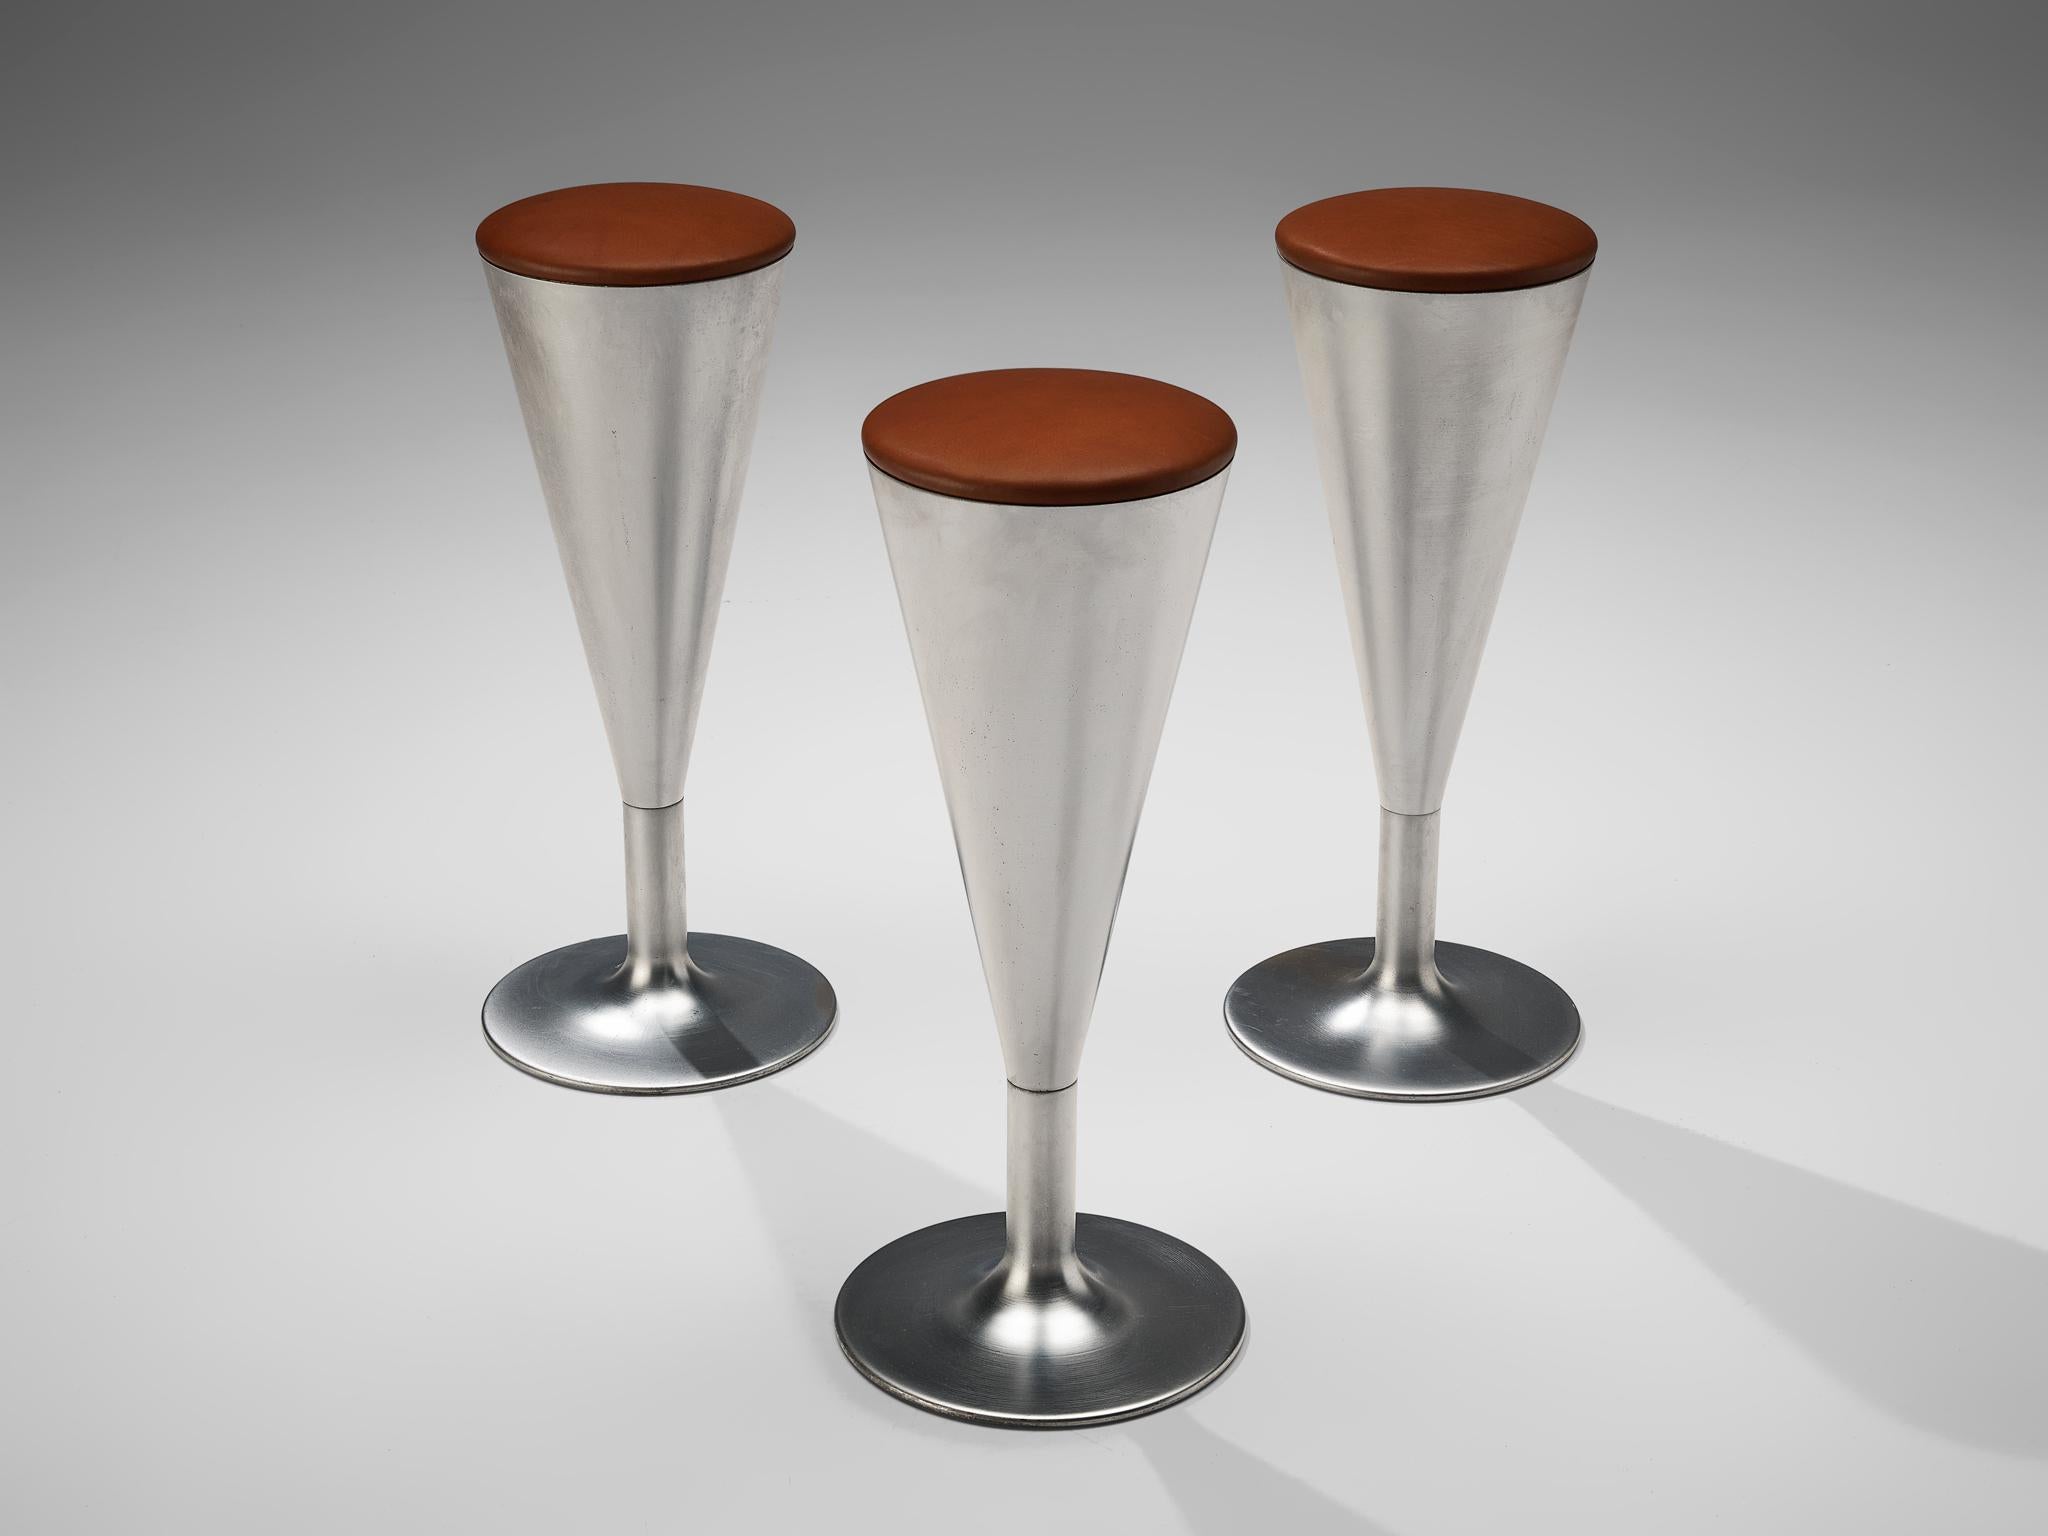 Leo thafvelin for Johanson design, set of three bar stools, patinated steel, leather, Sweden, 1960s 

This eccentric set of three bar stools is designed by the Swedish designer Leo Thafvelin. The stools are executed in a thick cognac leather for